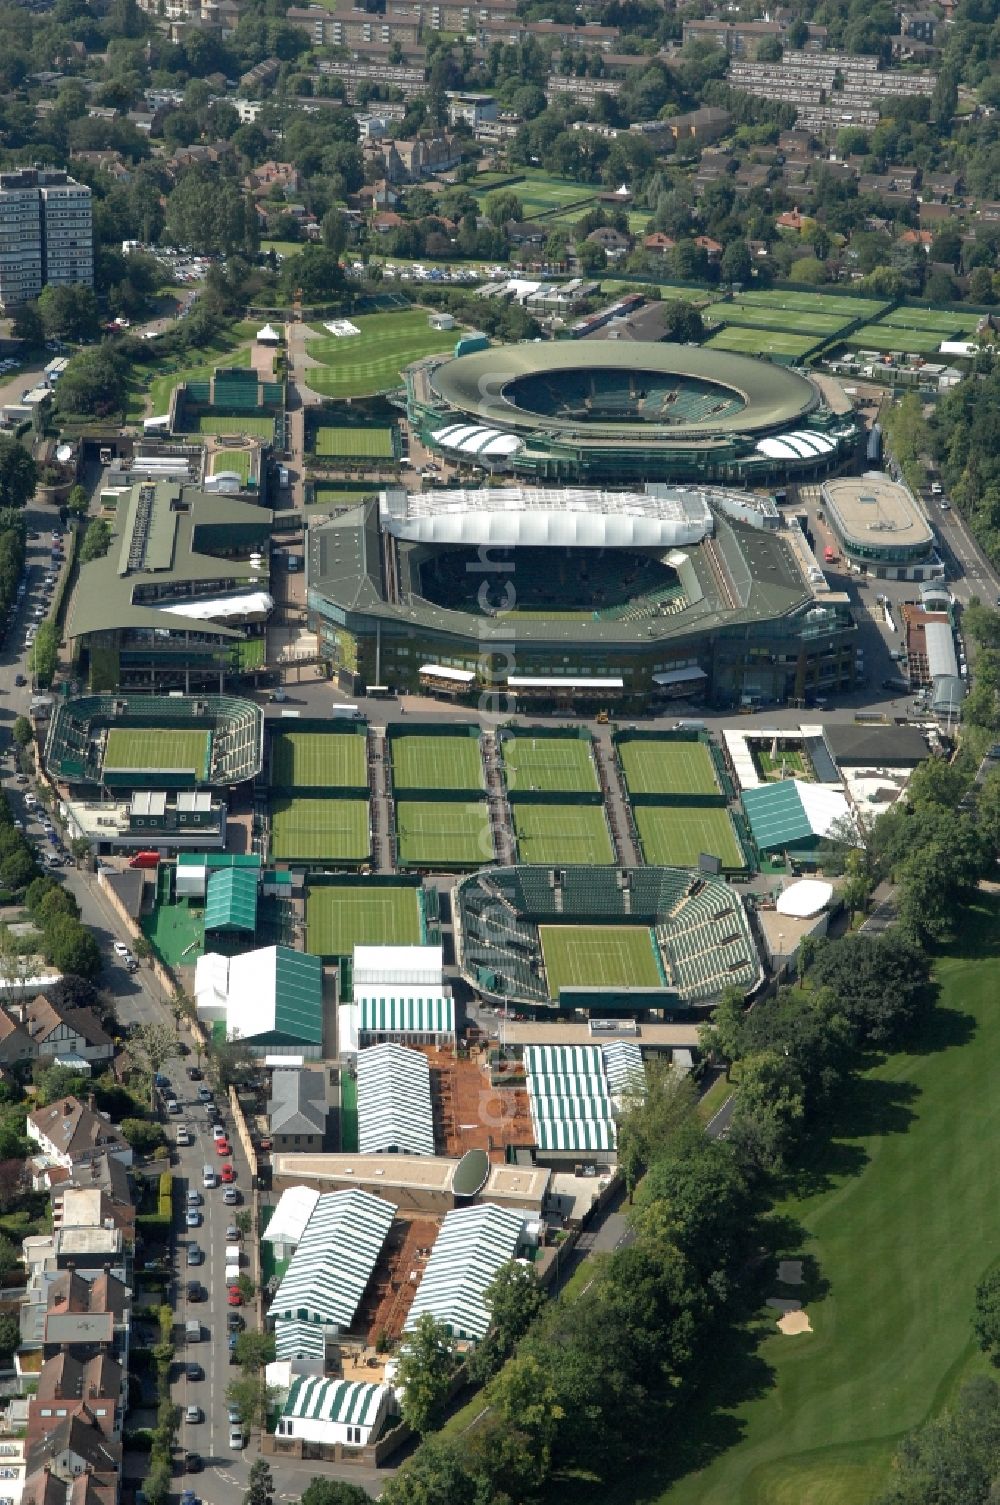 Aerial photograph London - Venue of the tennis tournament the Championships, Wimbledon with the Centre Court and one of the Olympic and Paralympic venues for the 2012 Games in London in England, Great Britain